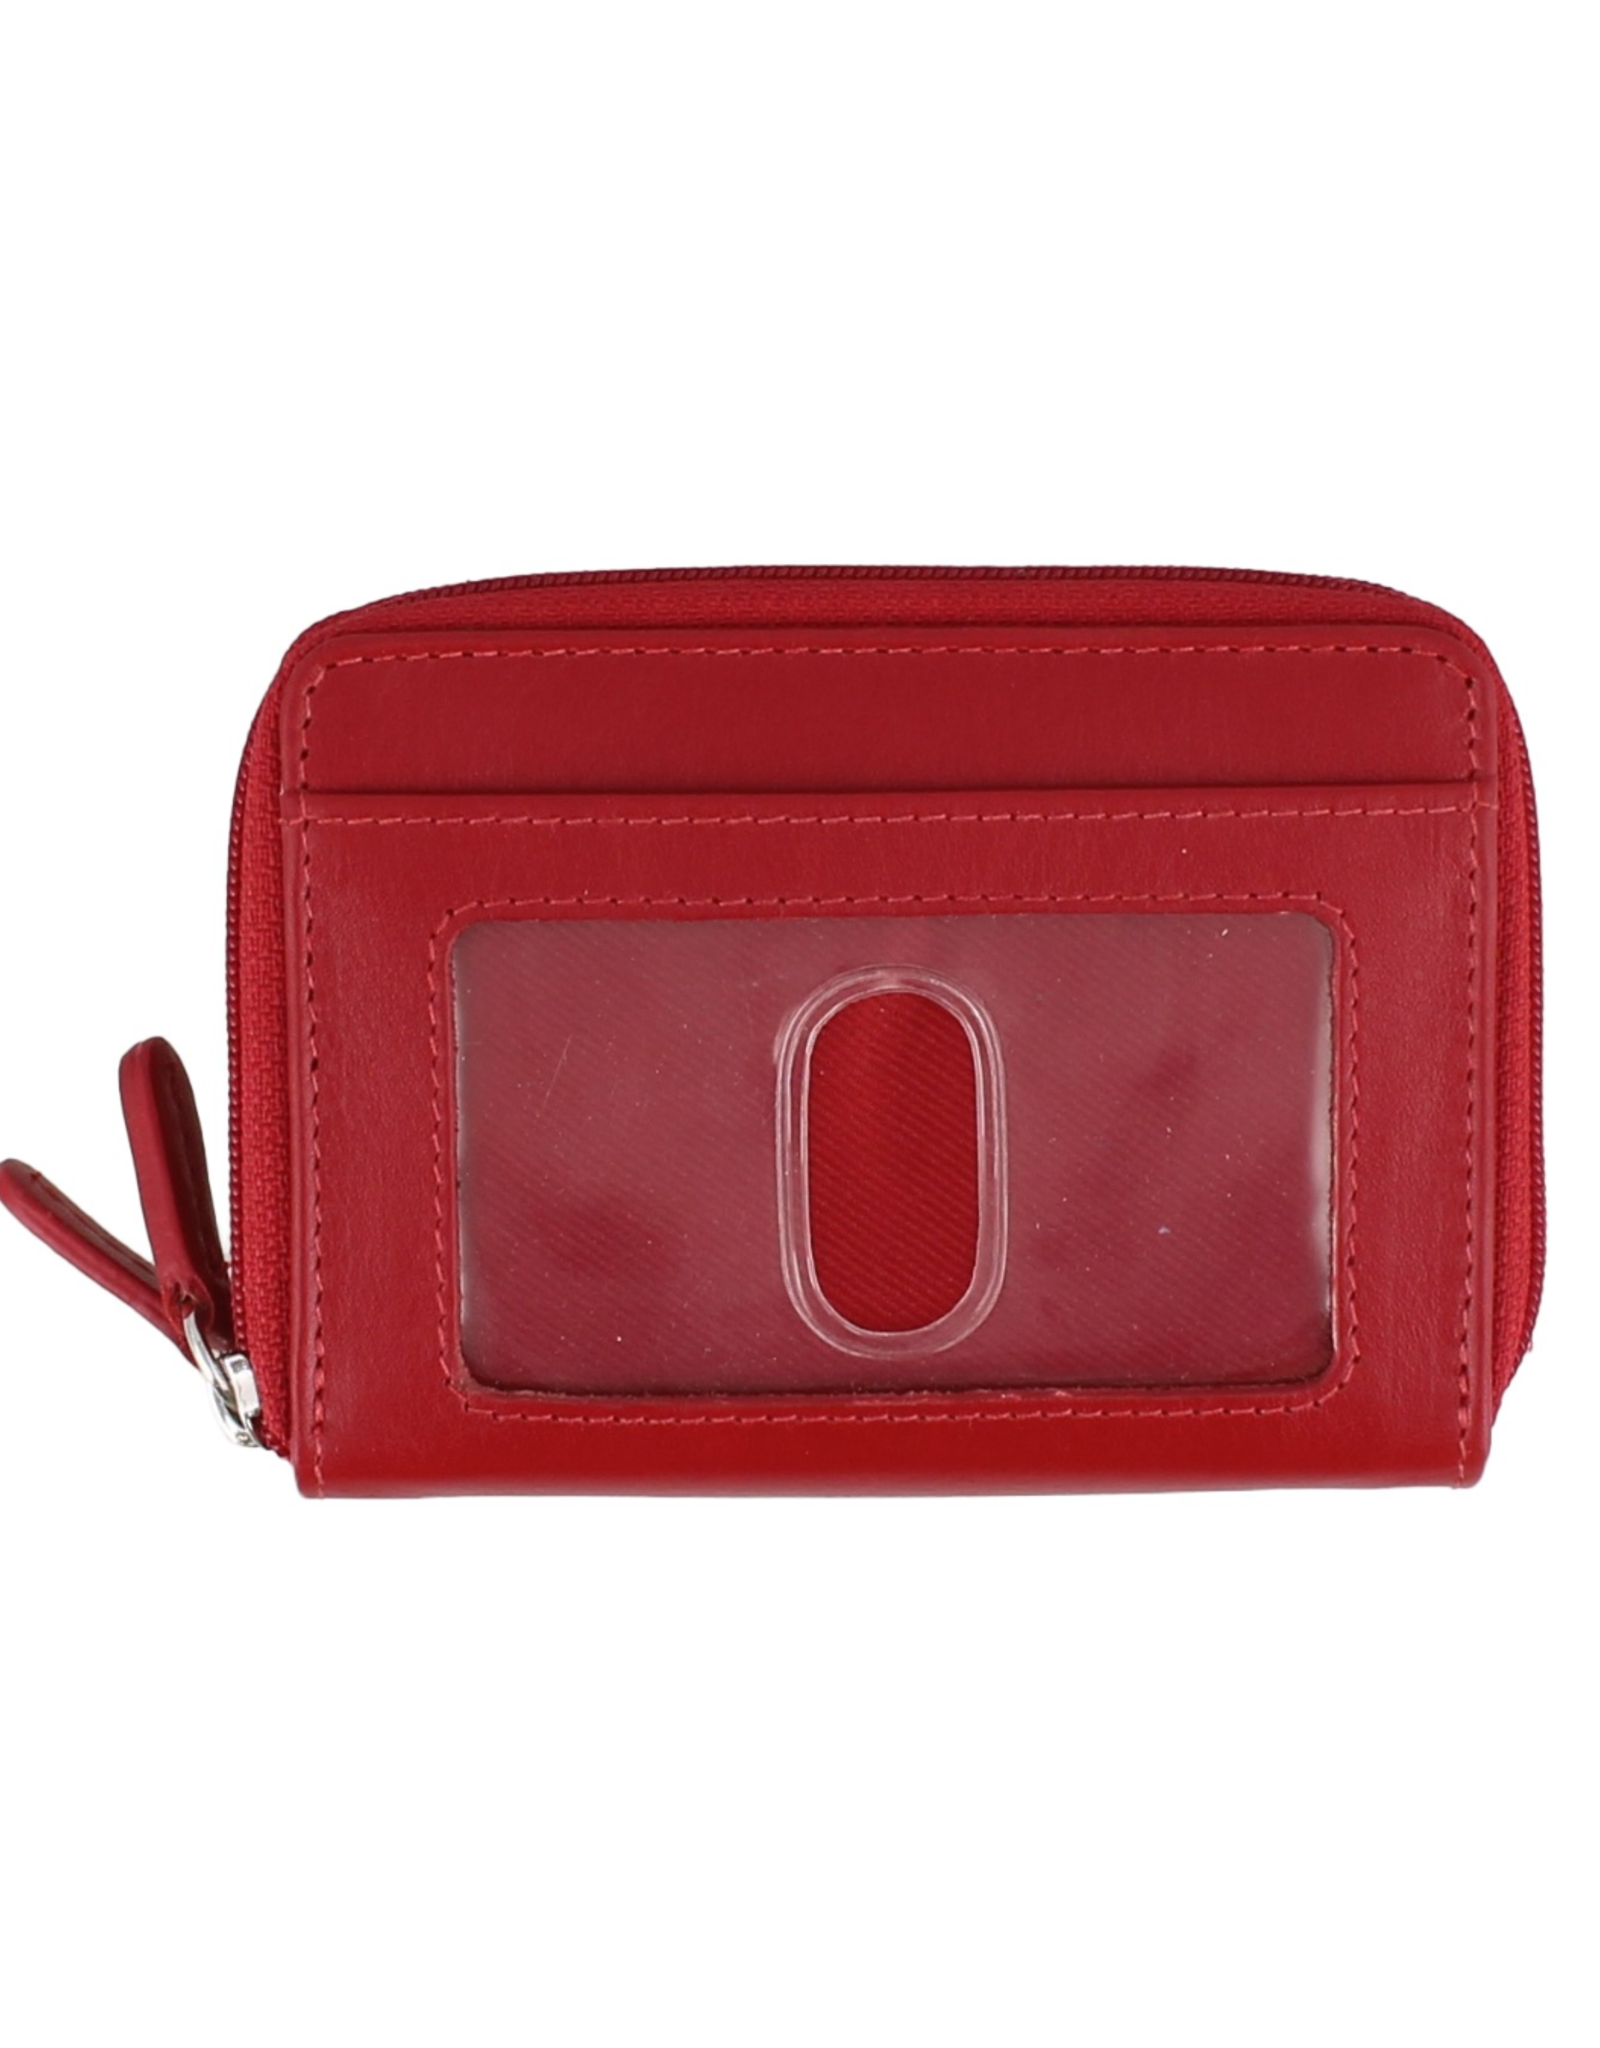 Double Zip Red Leather Wallet